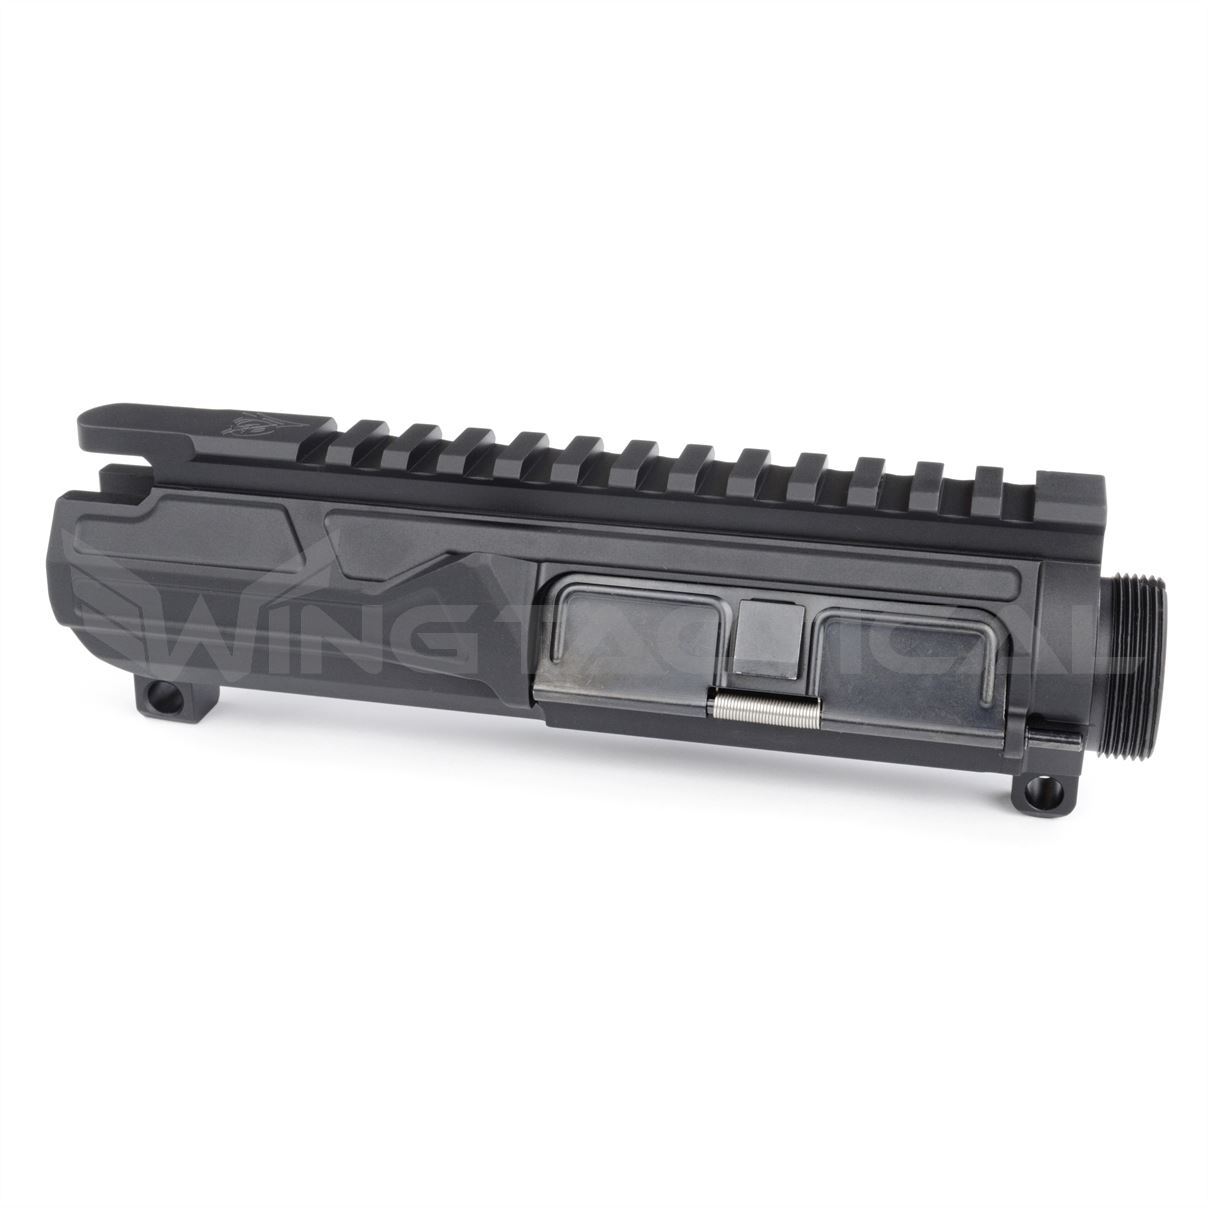 Best AR-15 Upper Receivers [2021 Product Review Guide] - Wing Tactical